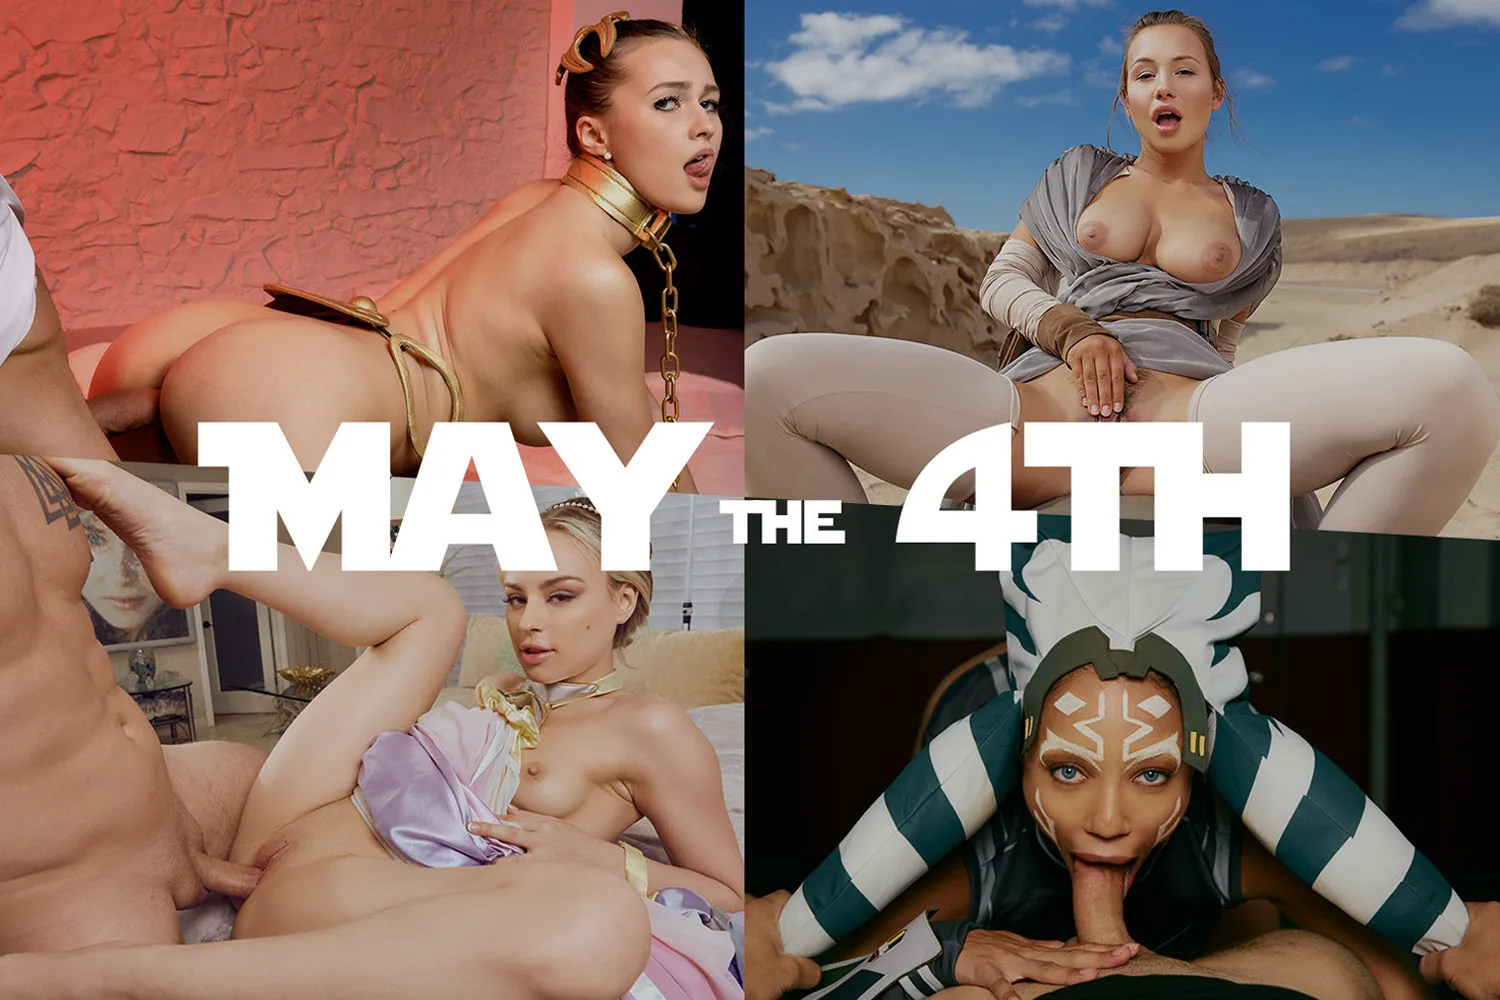 [2022-05-04] Star Wars: May The 4th Compilation - VRCosplayX